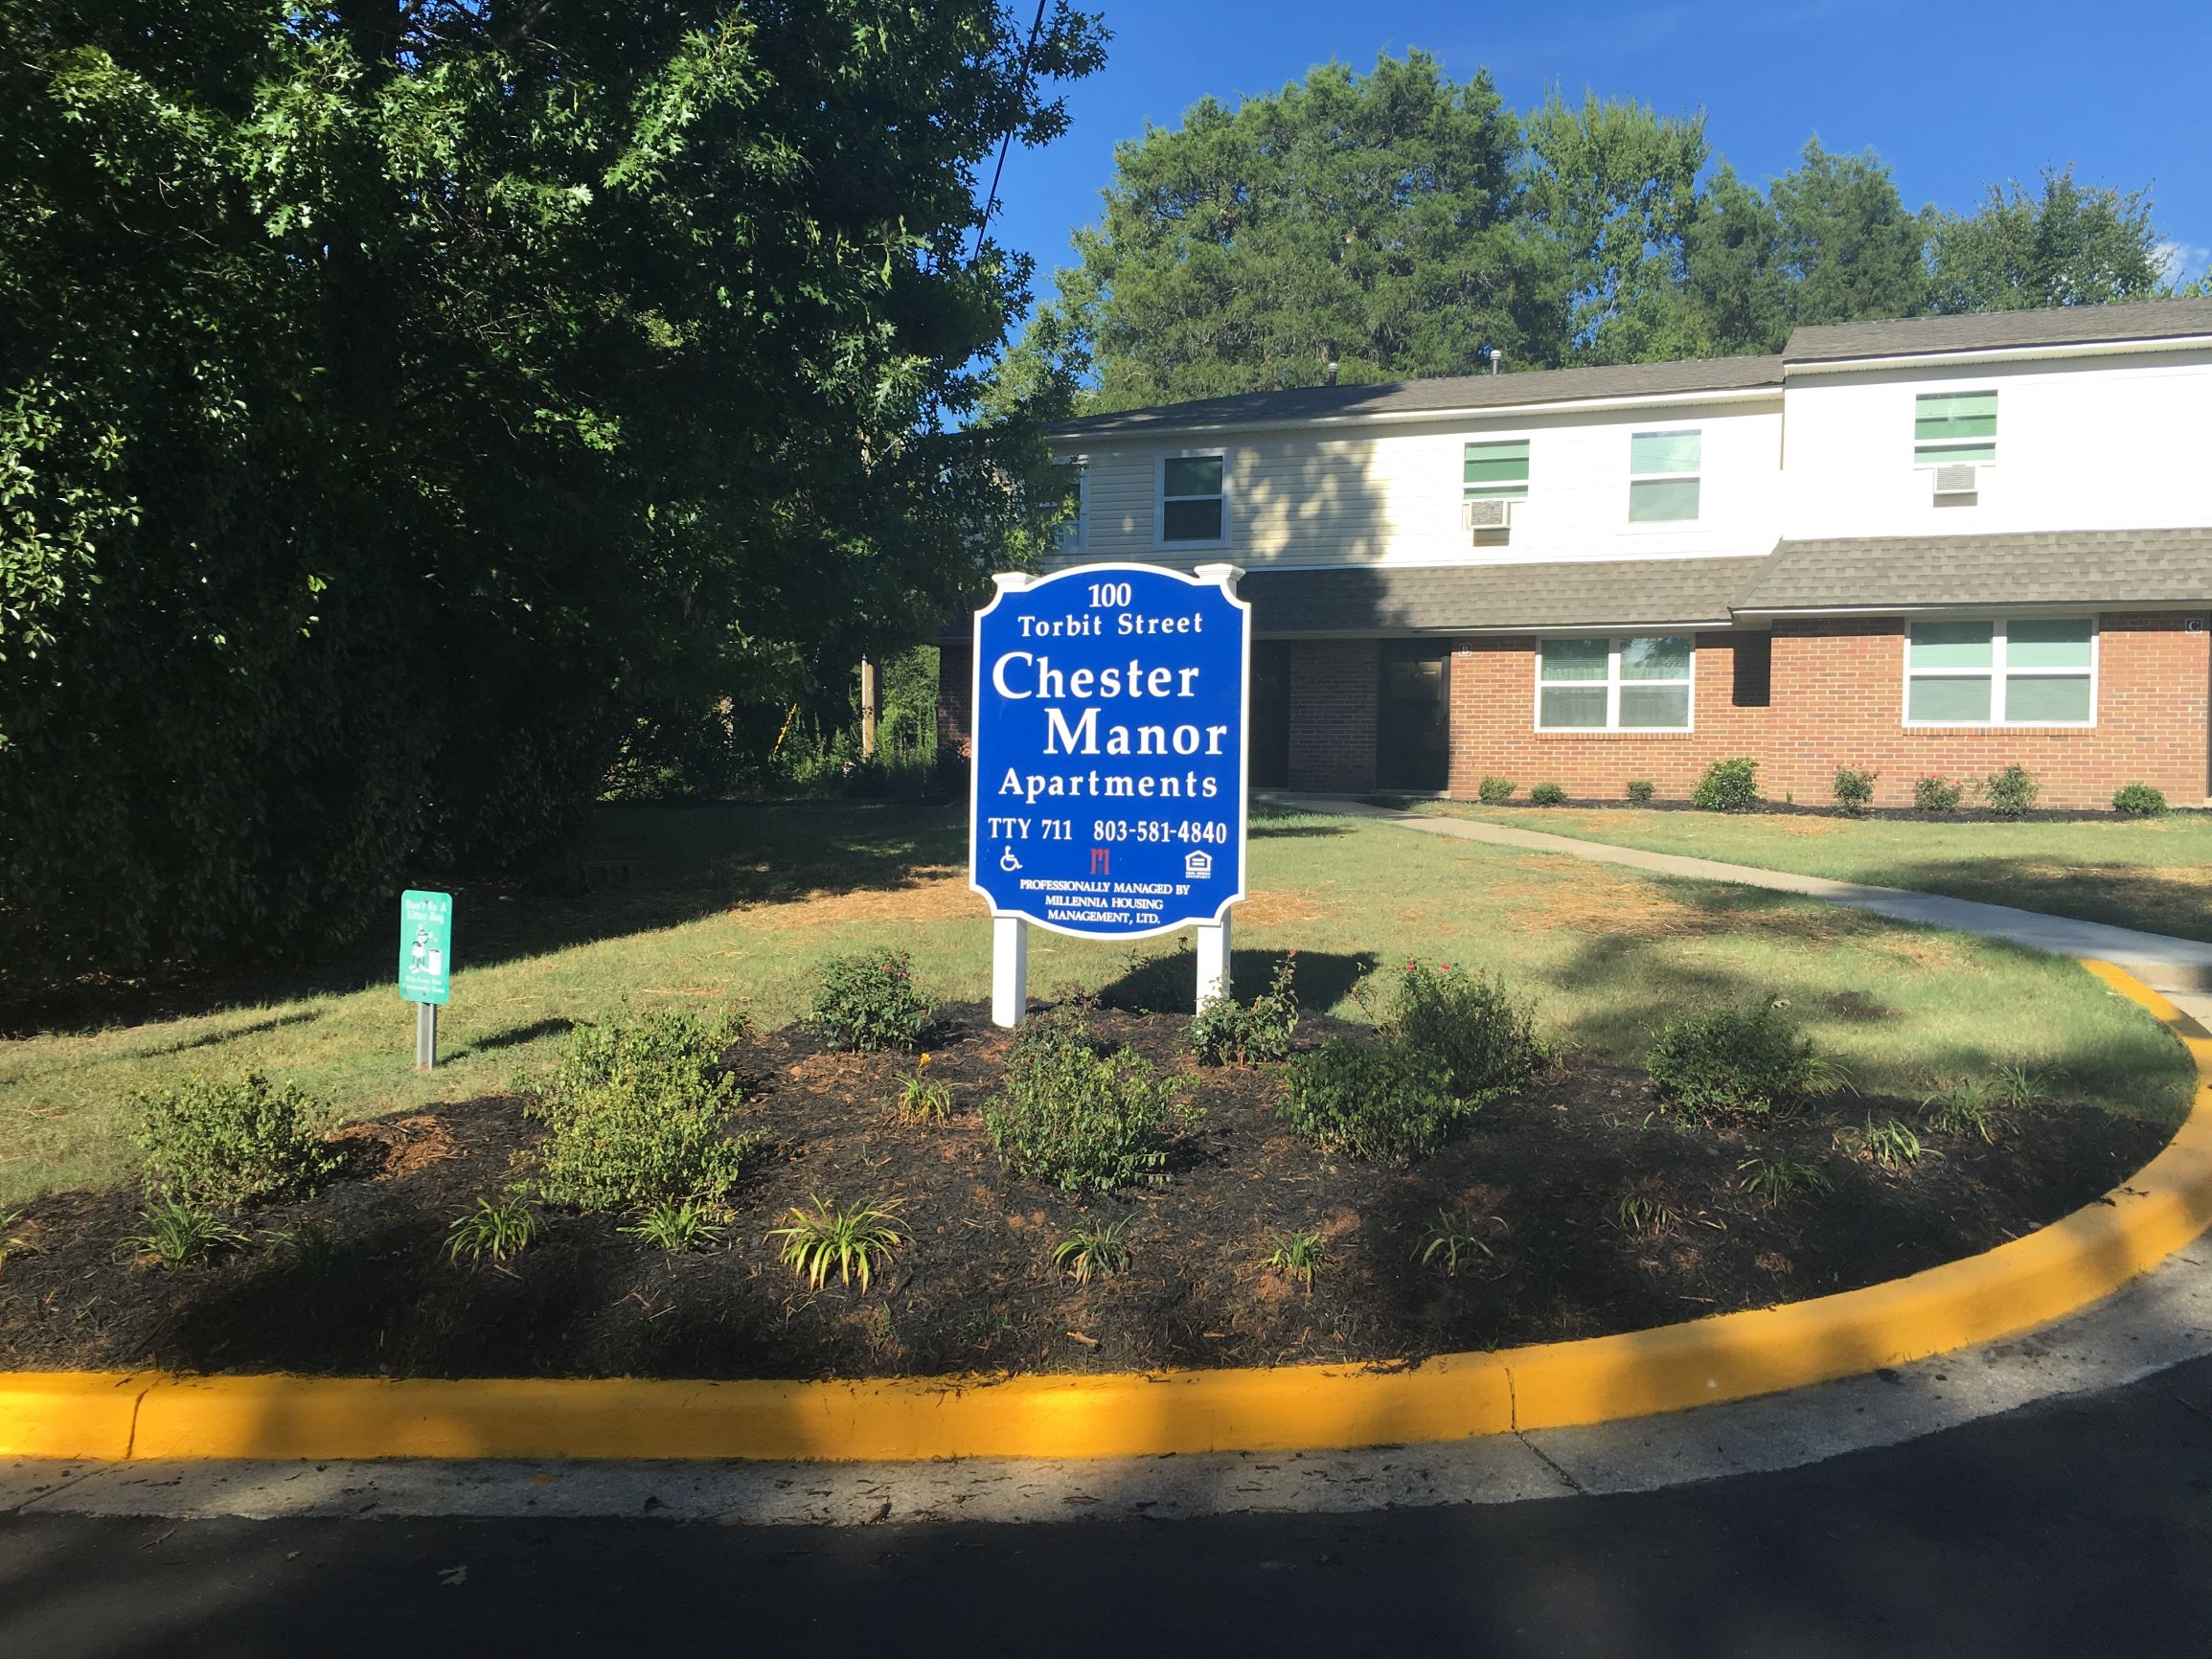 CHESTER MANOR APARTMENTS